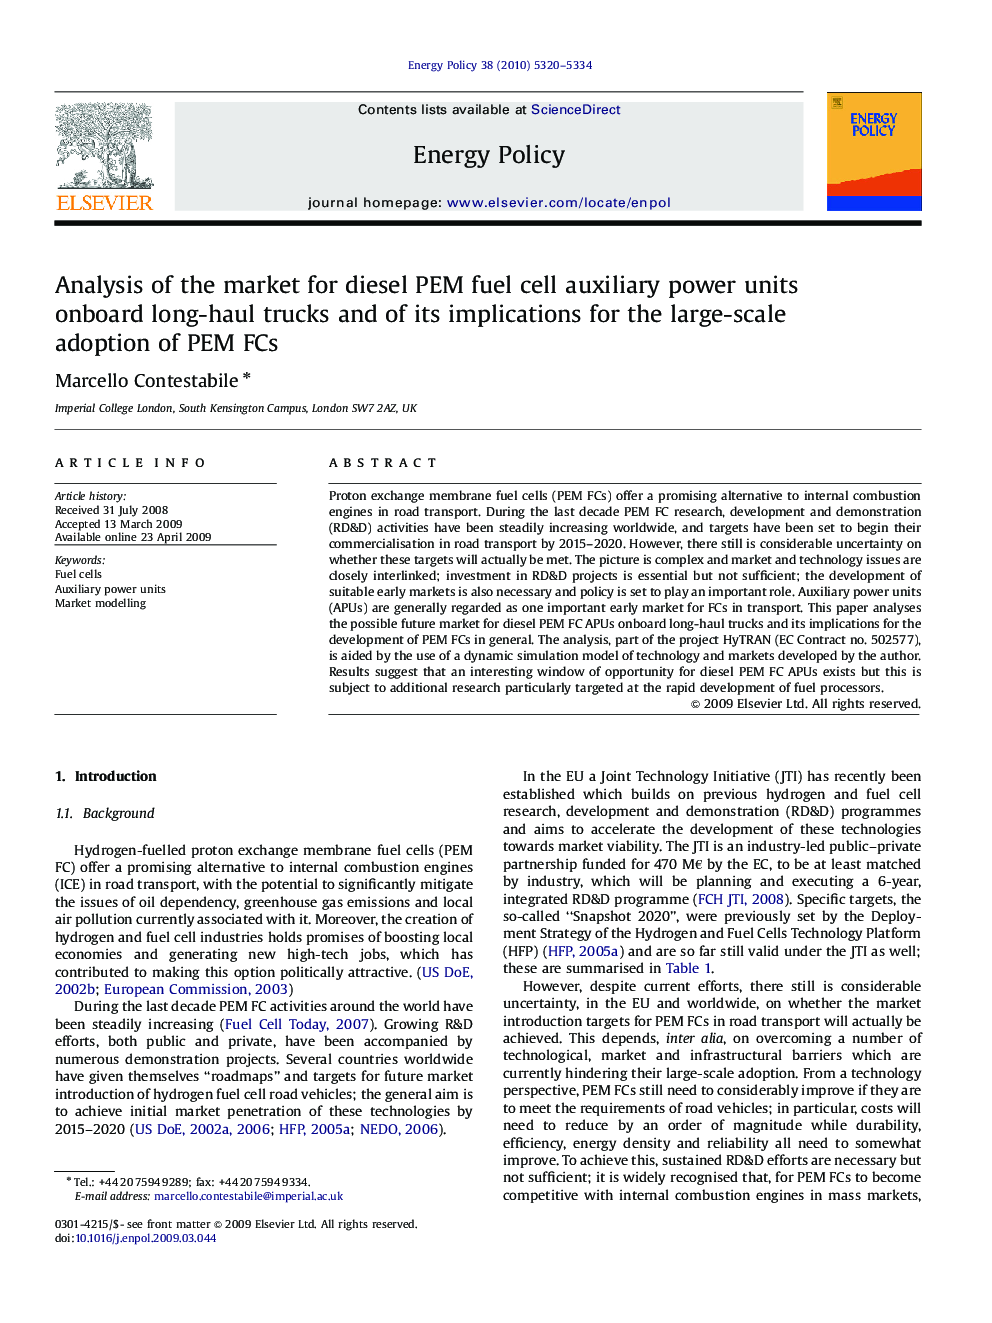 Analysis of the market for diesel PEM fuel cell auxiliary power units onboard long-haul trucks and of its implications for the large-scale adoption of PEM FCs